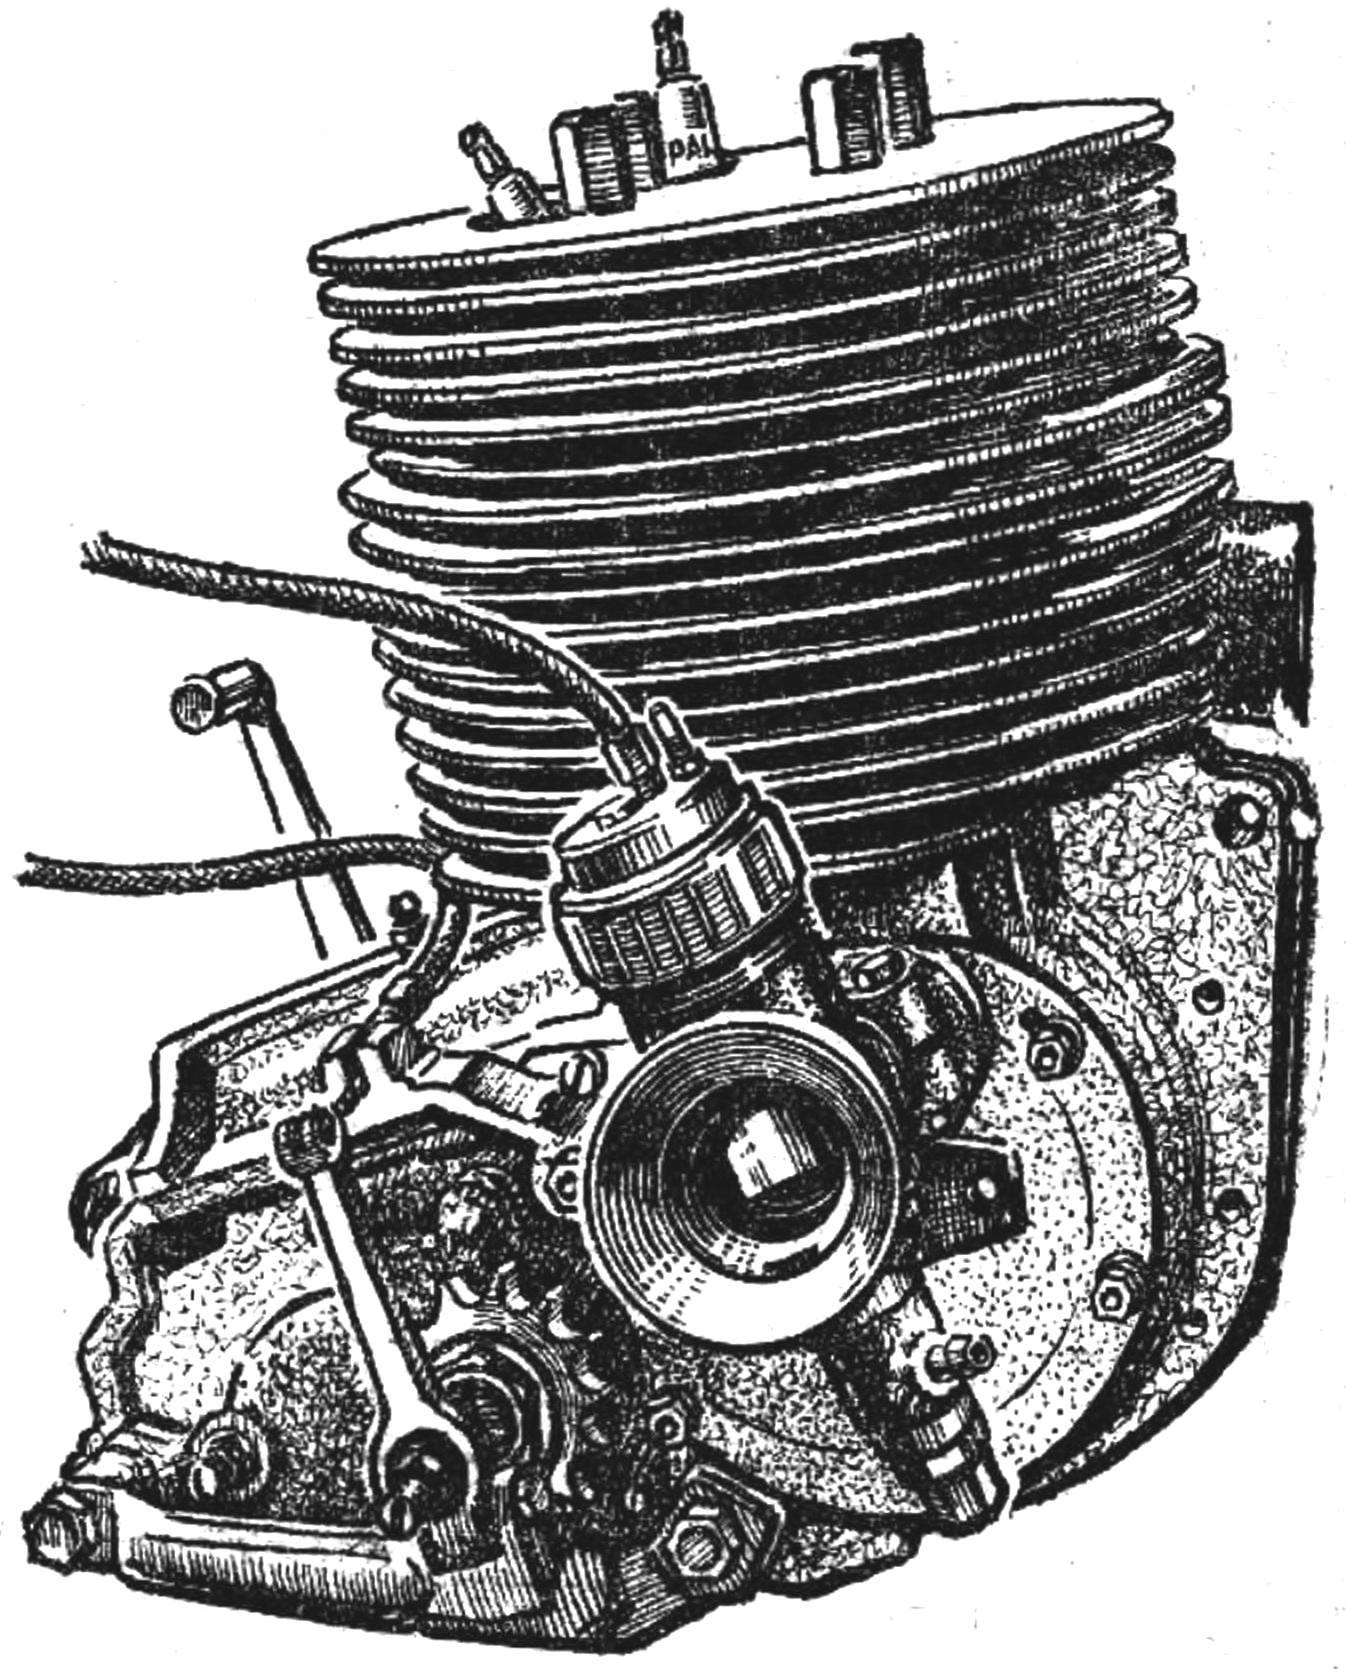 VALVE OF THE ENGINE FOR THE MAP